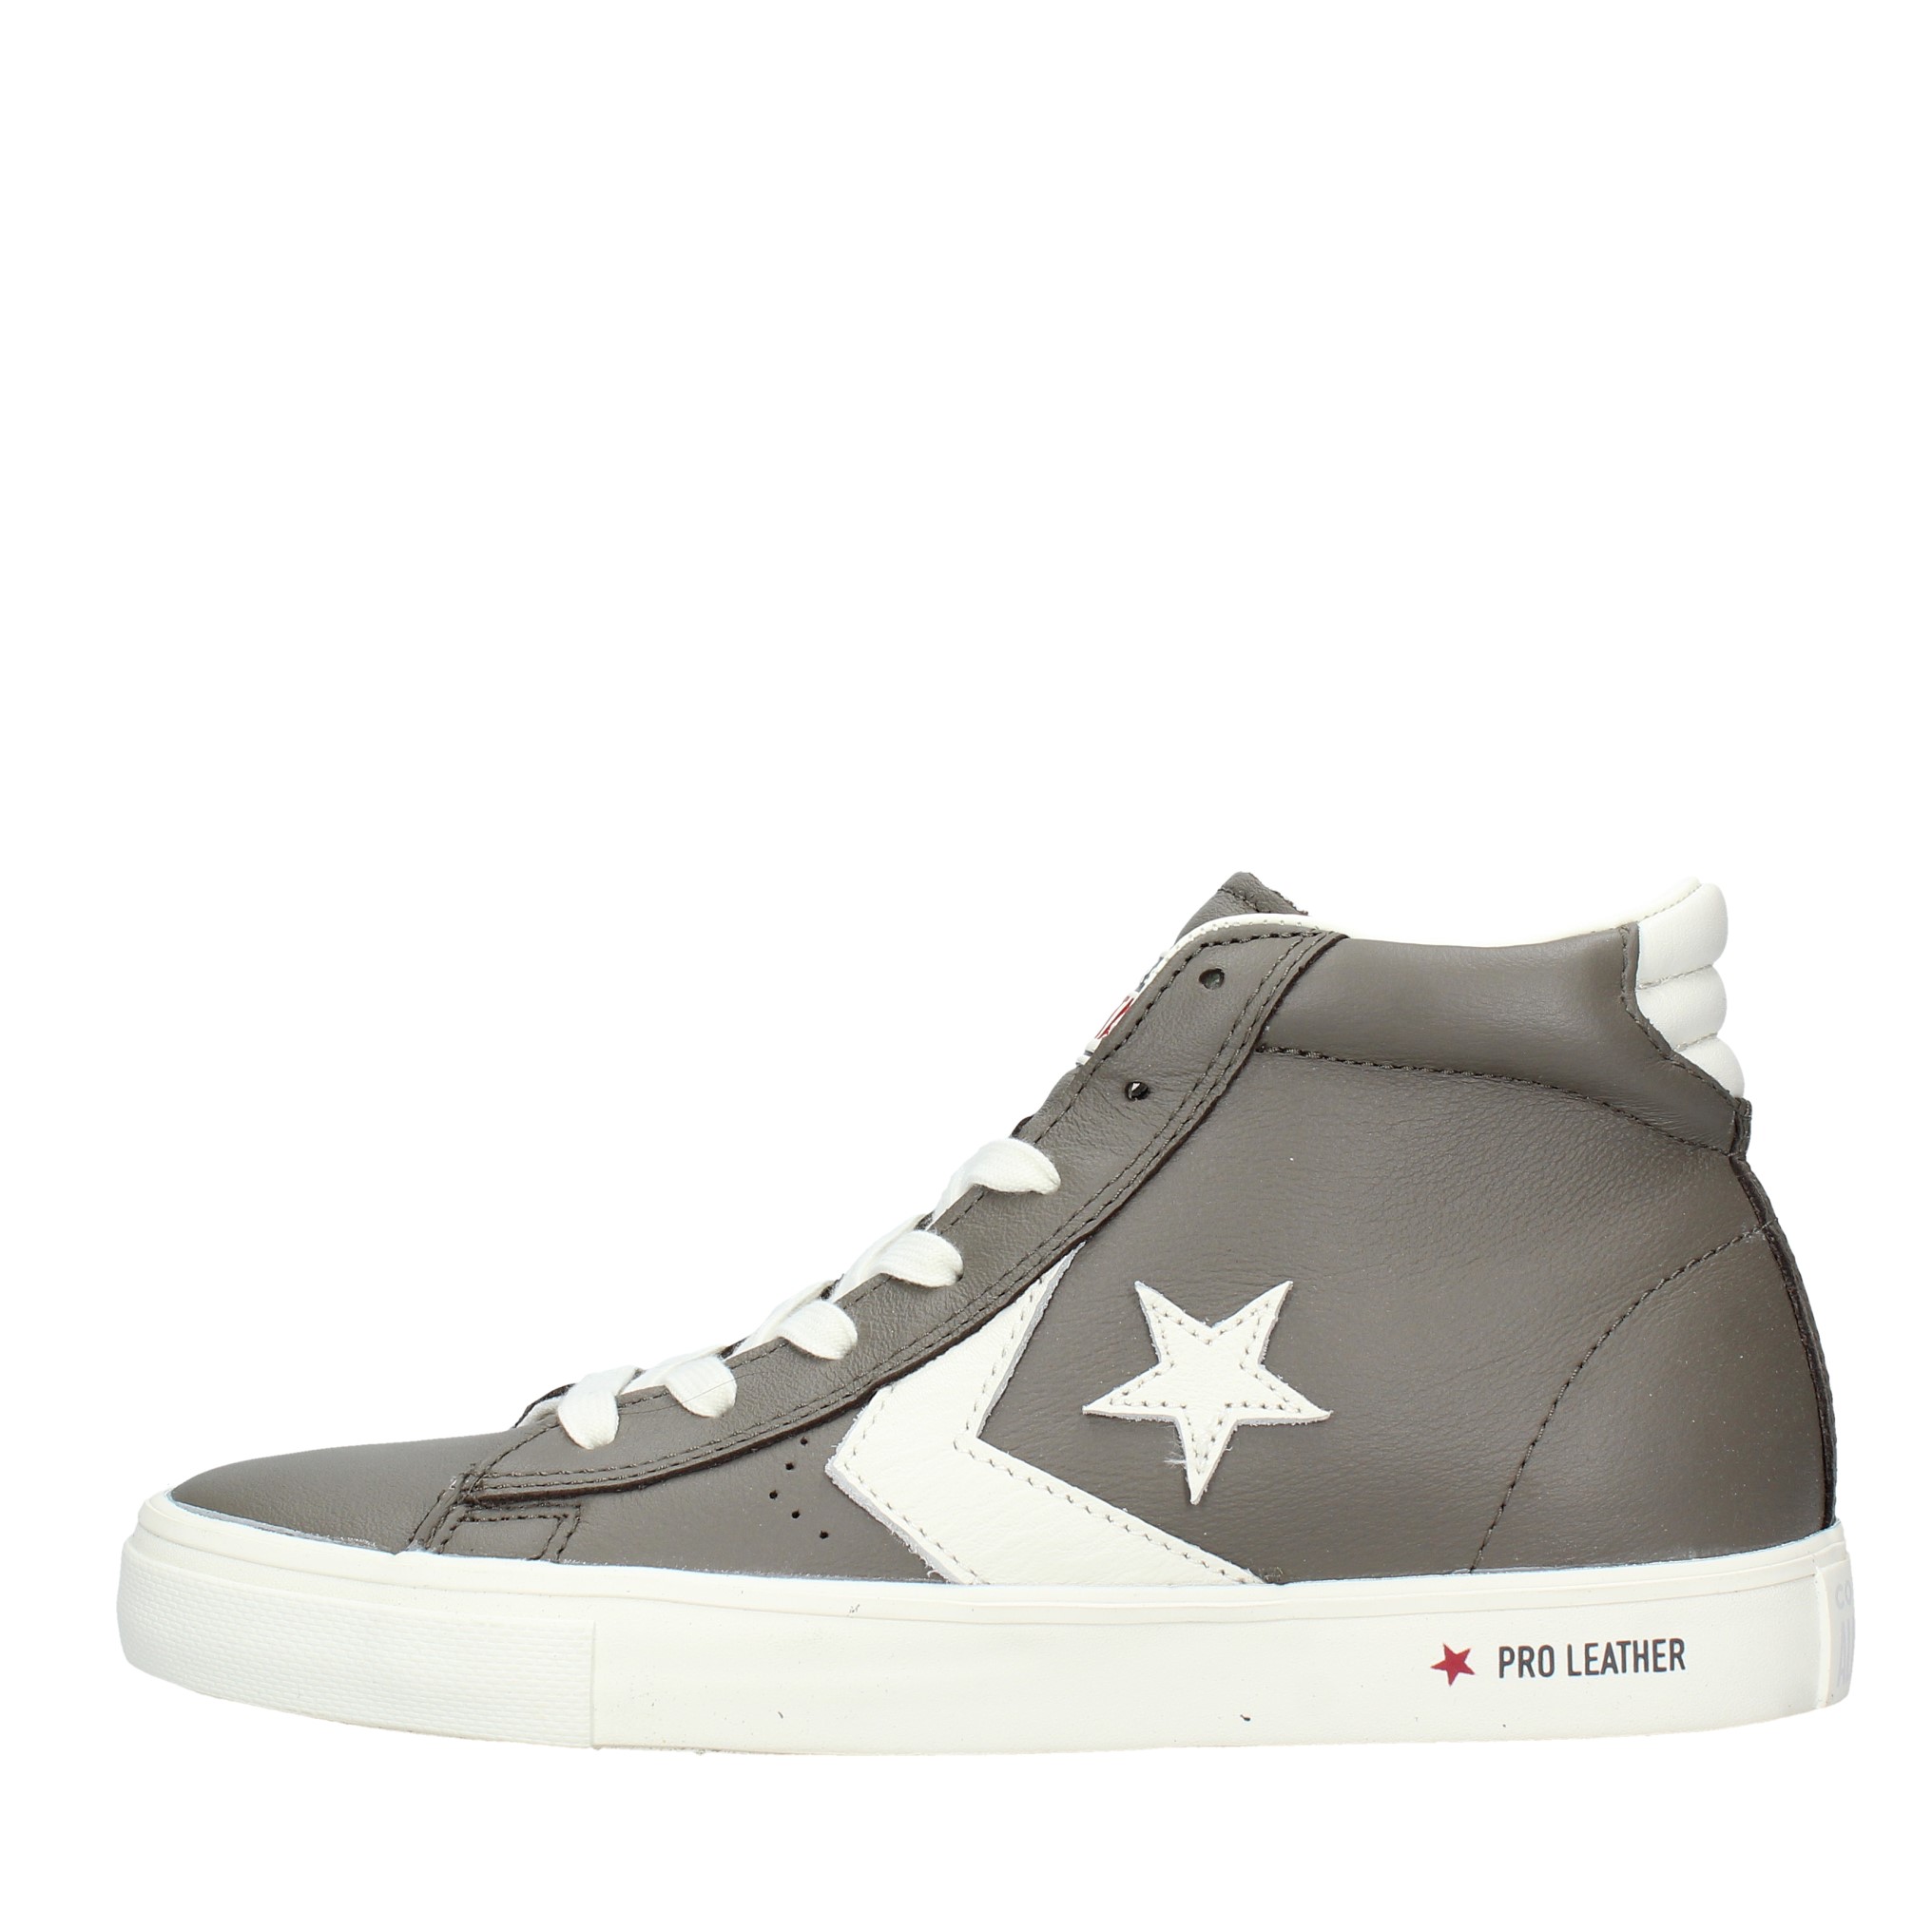 Sneakers in ecopelle. - CONVERSE - Ginevra calzature